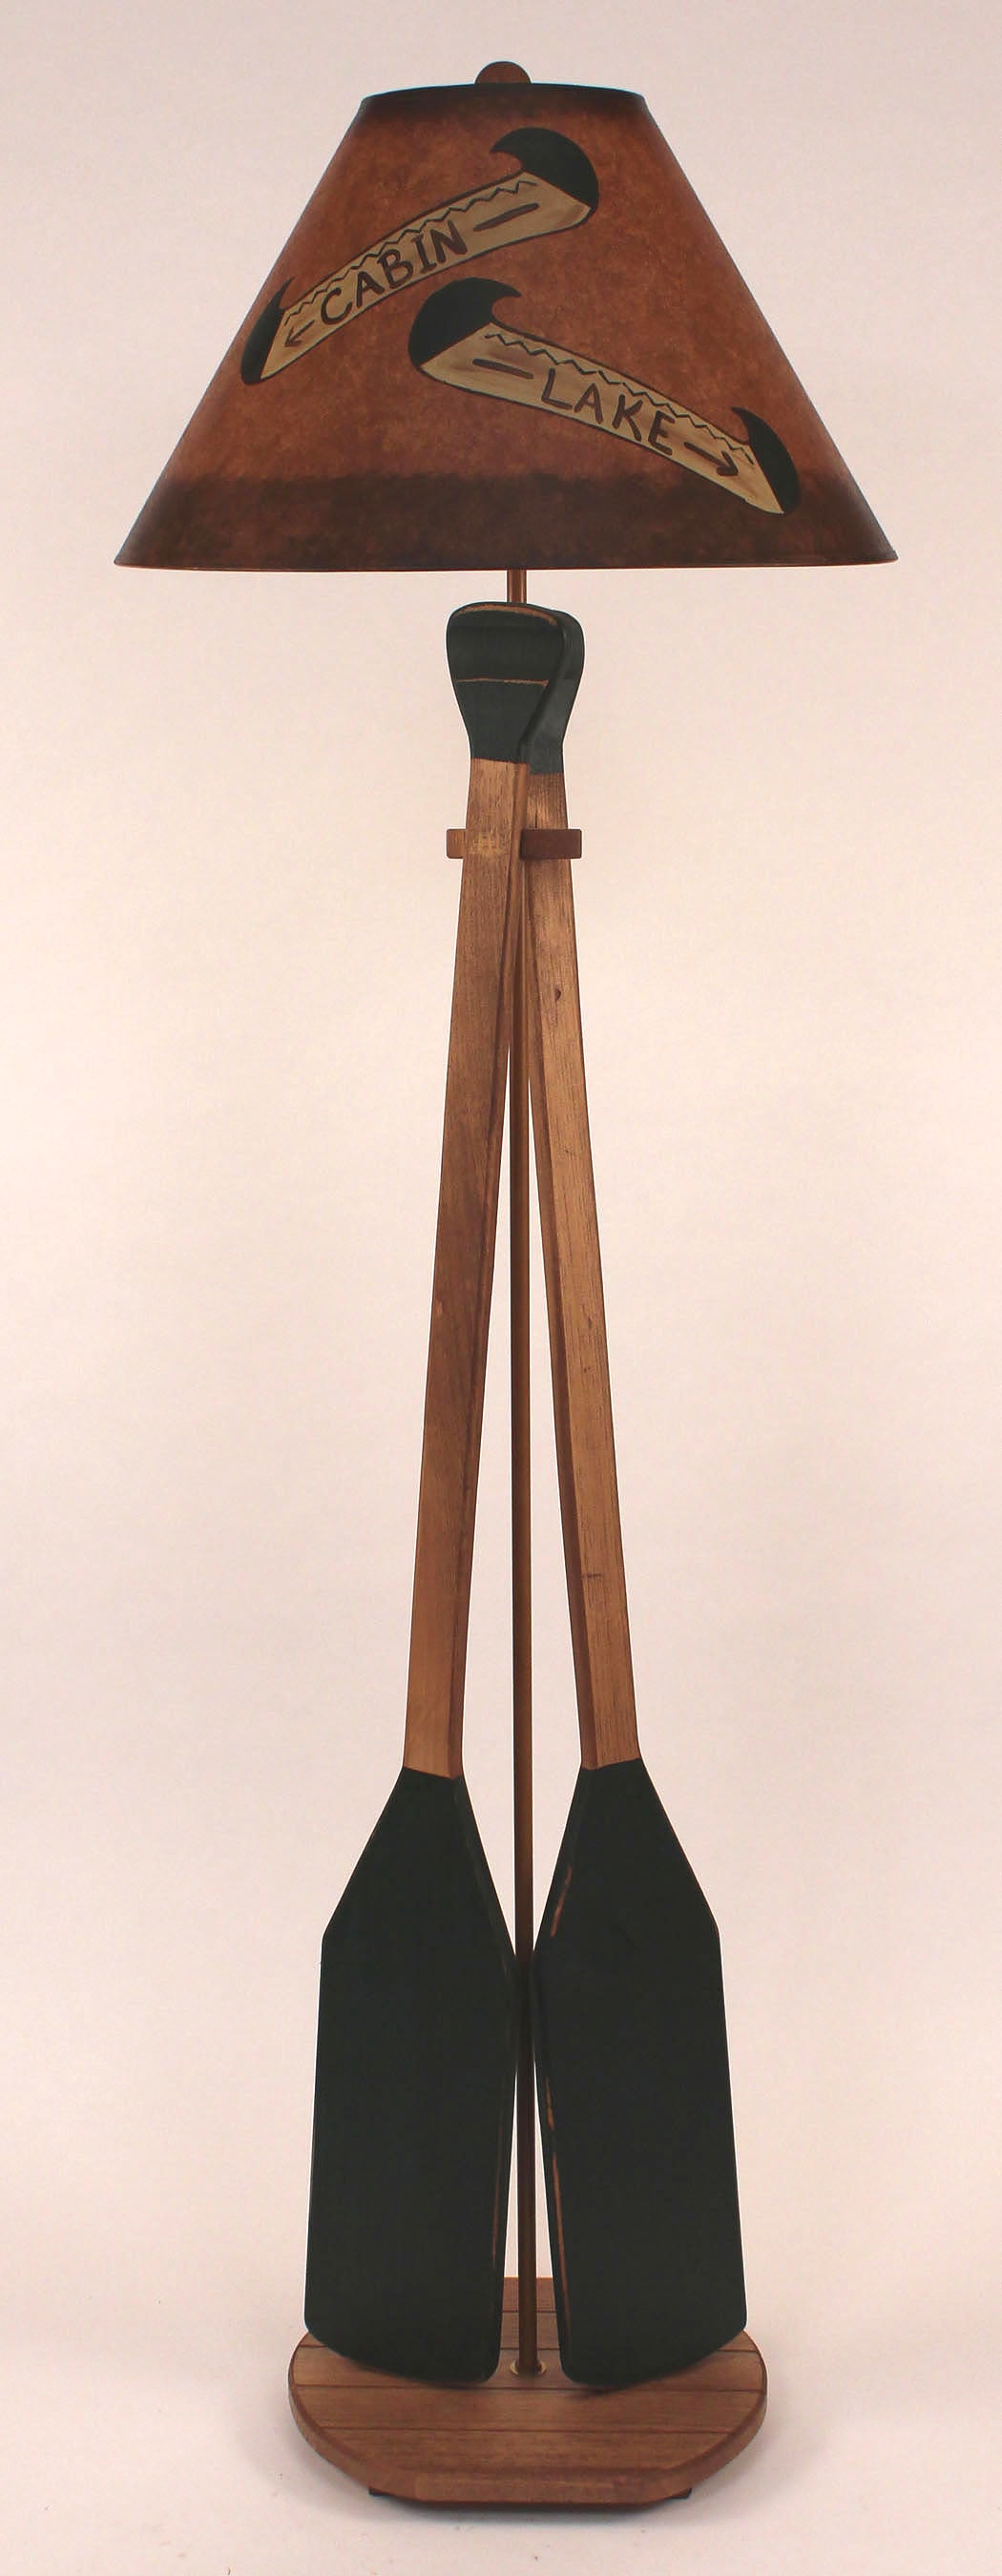 Stain/Green Cabin and Lake 2 Paddle Floor Lamp